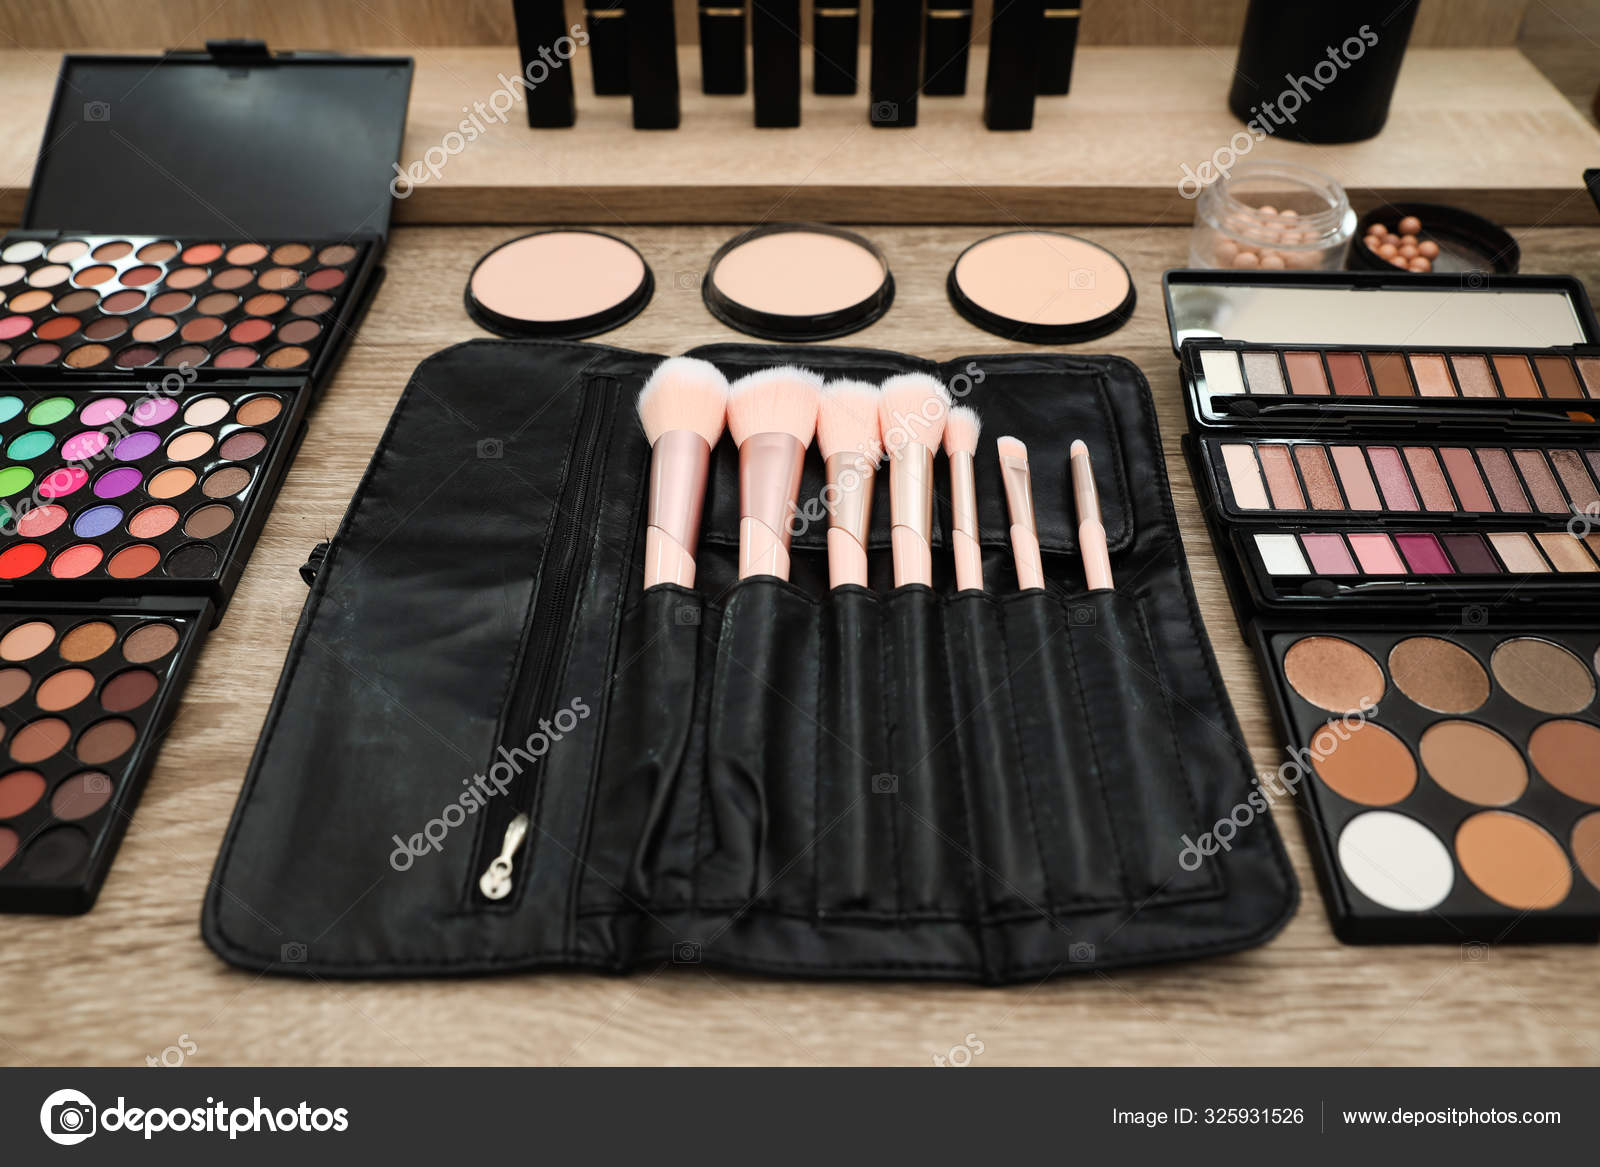 What is in a Professional Makeup Artists Kit